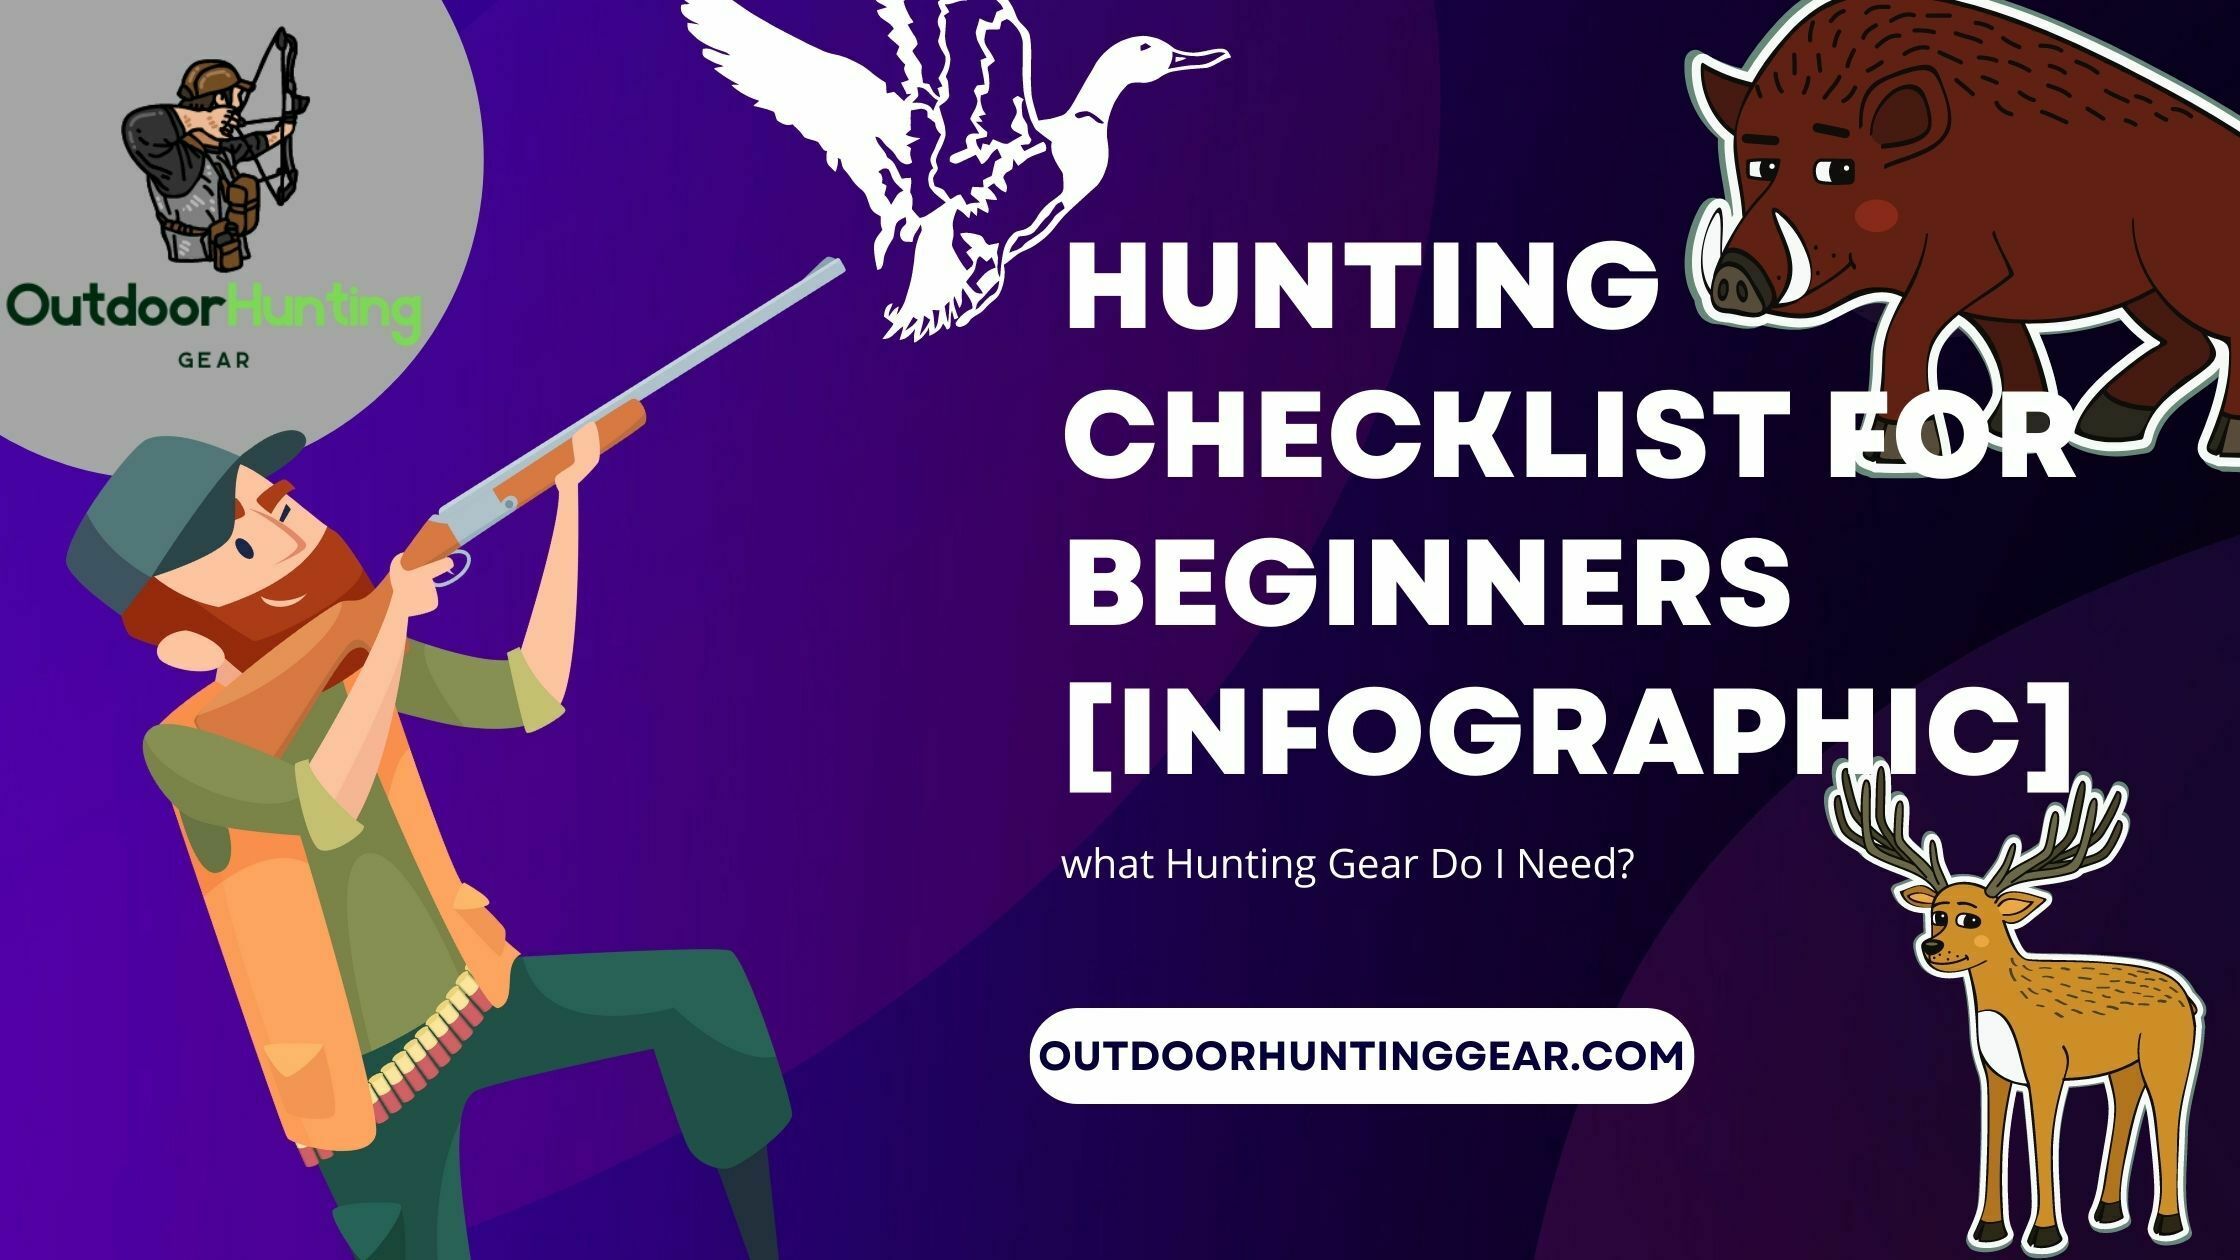 Hunting Checklist for Beginners [INFOGRAPHIC]